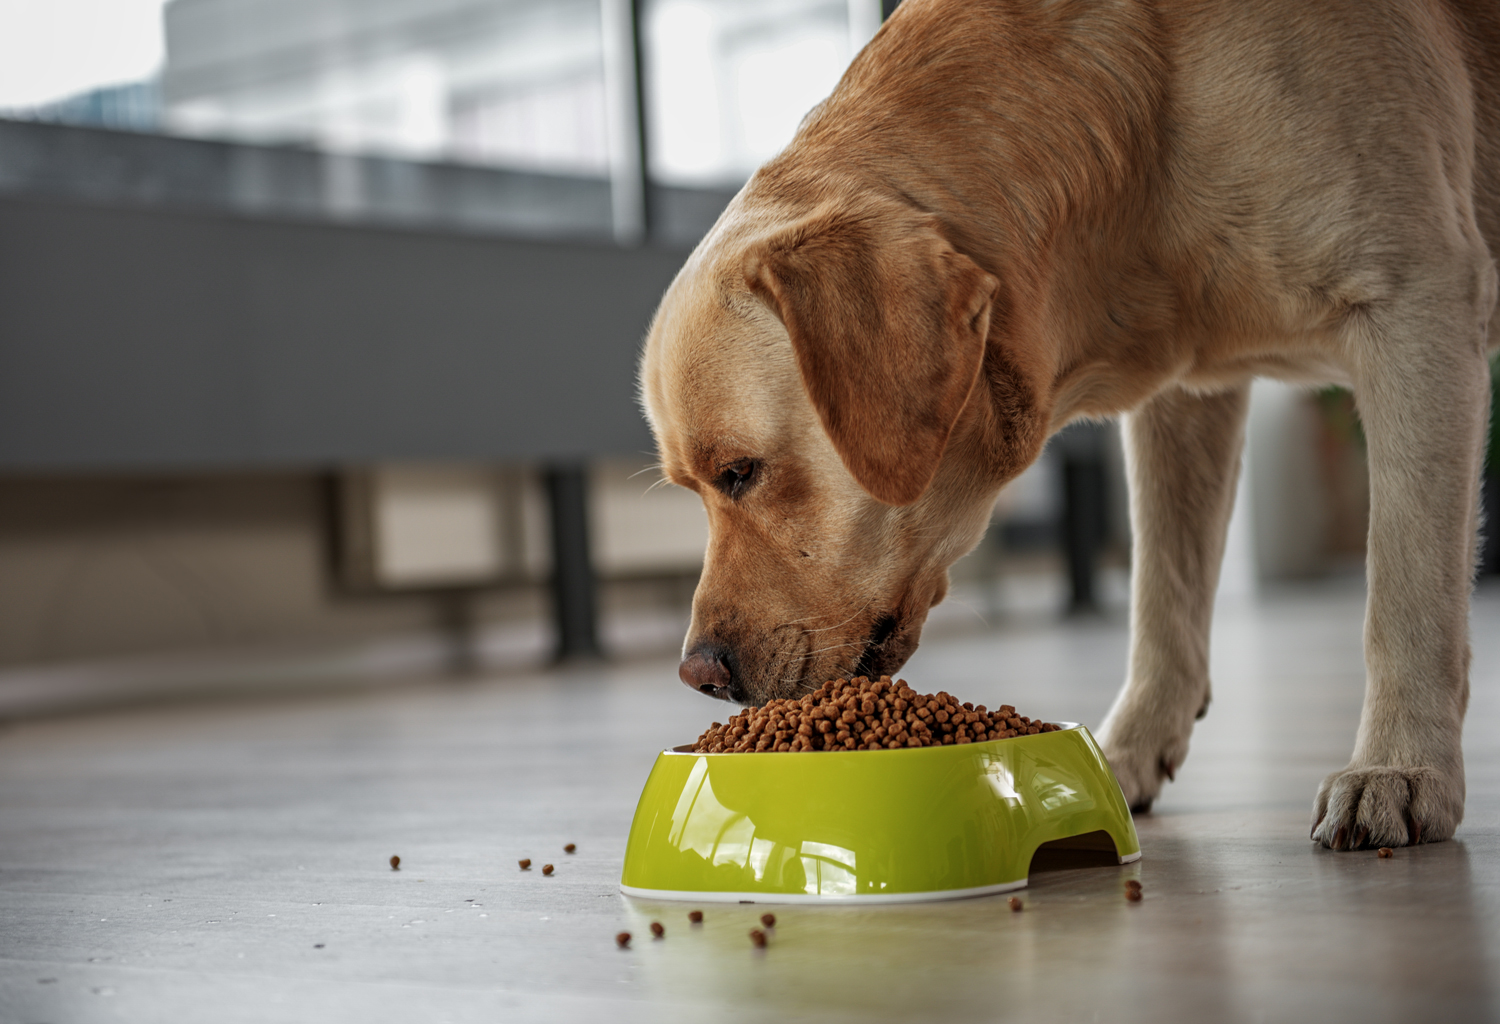 An older dog eating food from a bowl in a kitchen